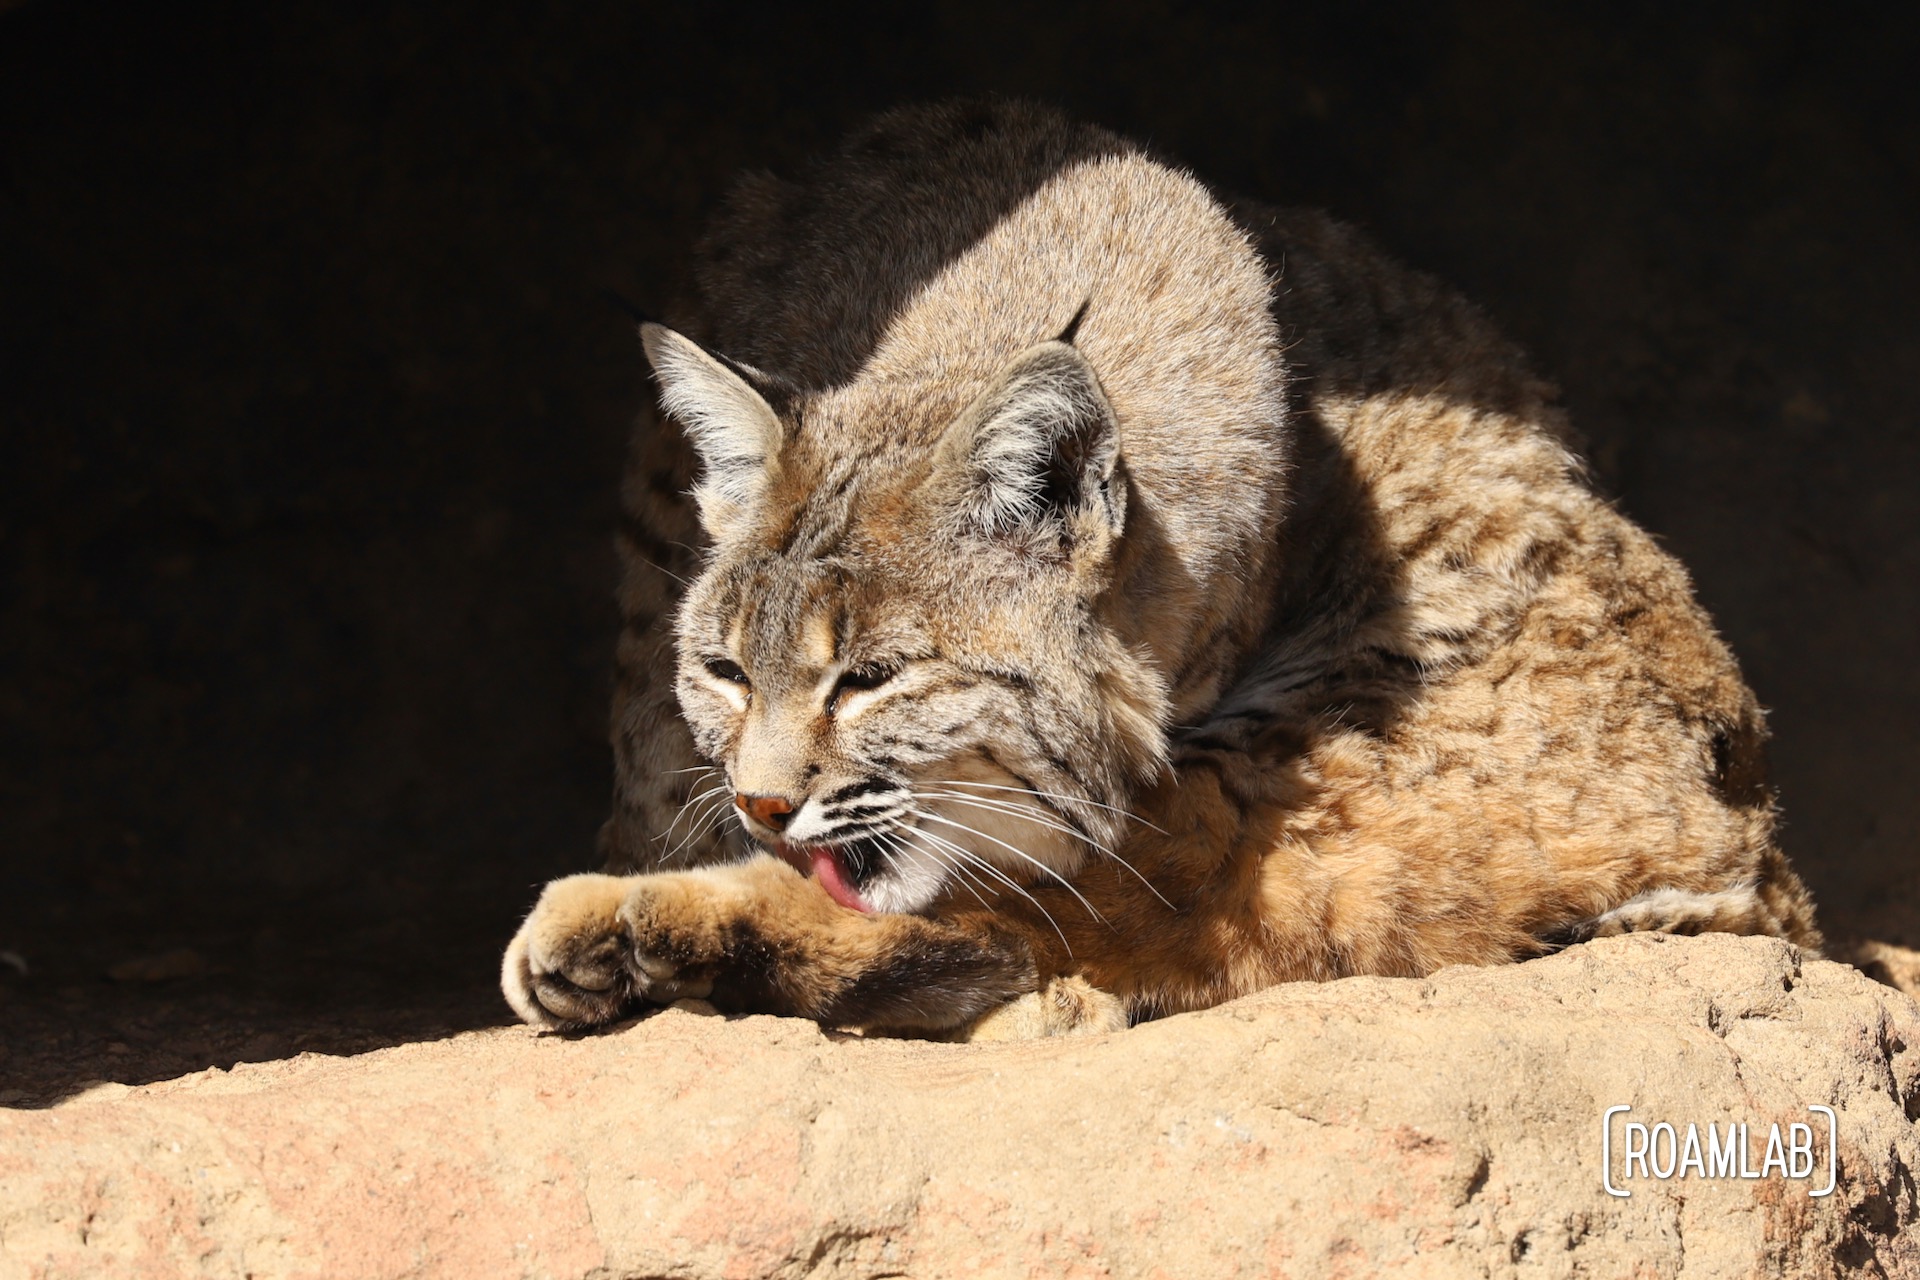 Bobcat grooming on a rock ledge at the Arizona-Sonora Desert Museum.